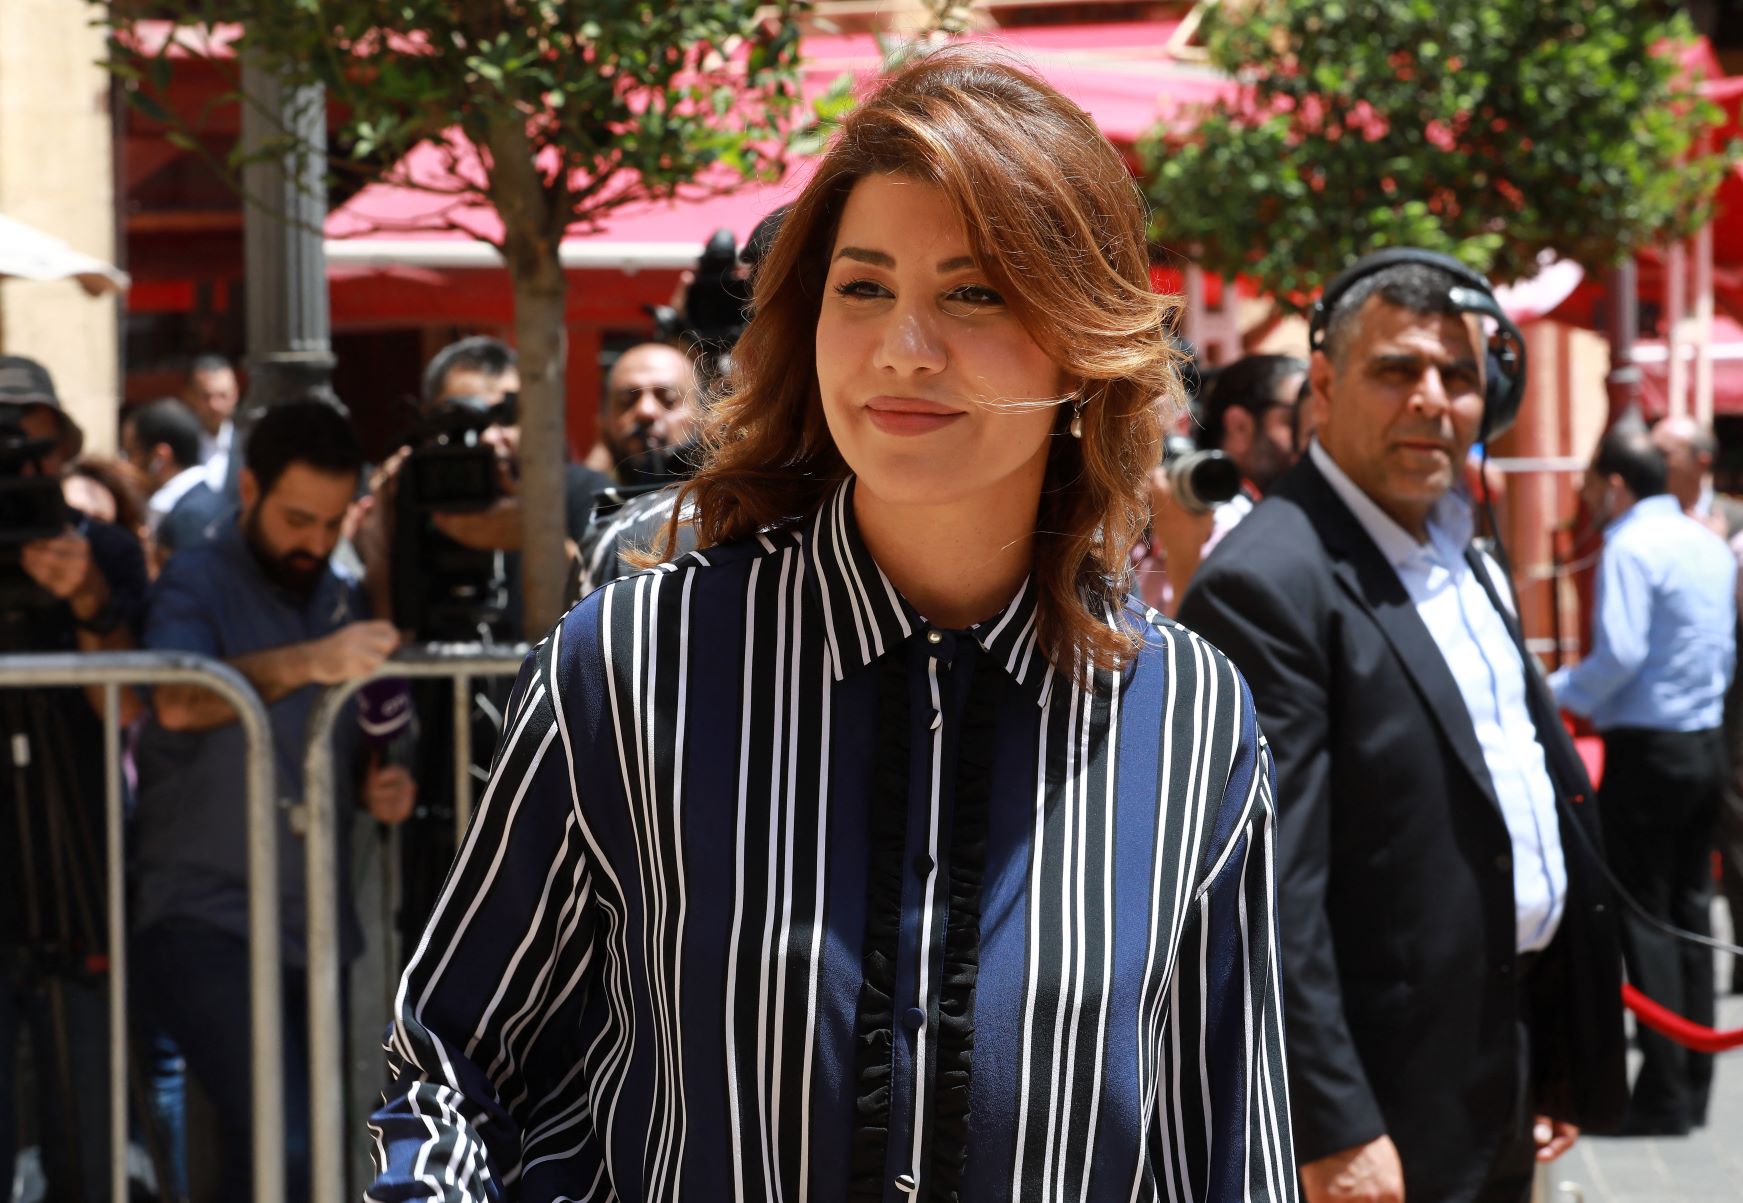 Newly elected Lebanese MP Paula Yacoubian, arrives at Lebanon's parliament in the capital Beirut ahead of a session to elect a new speaker, on May 23, 2018 (AFP)